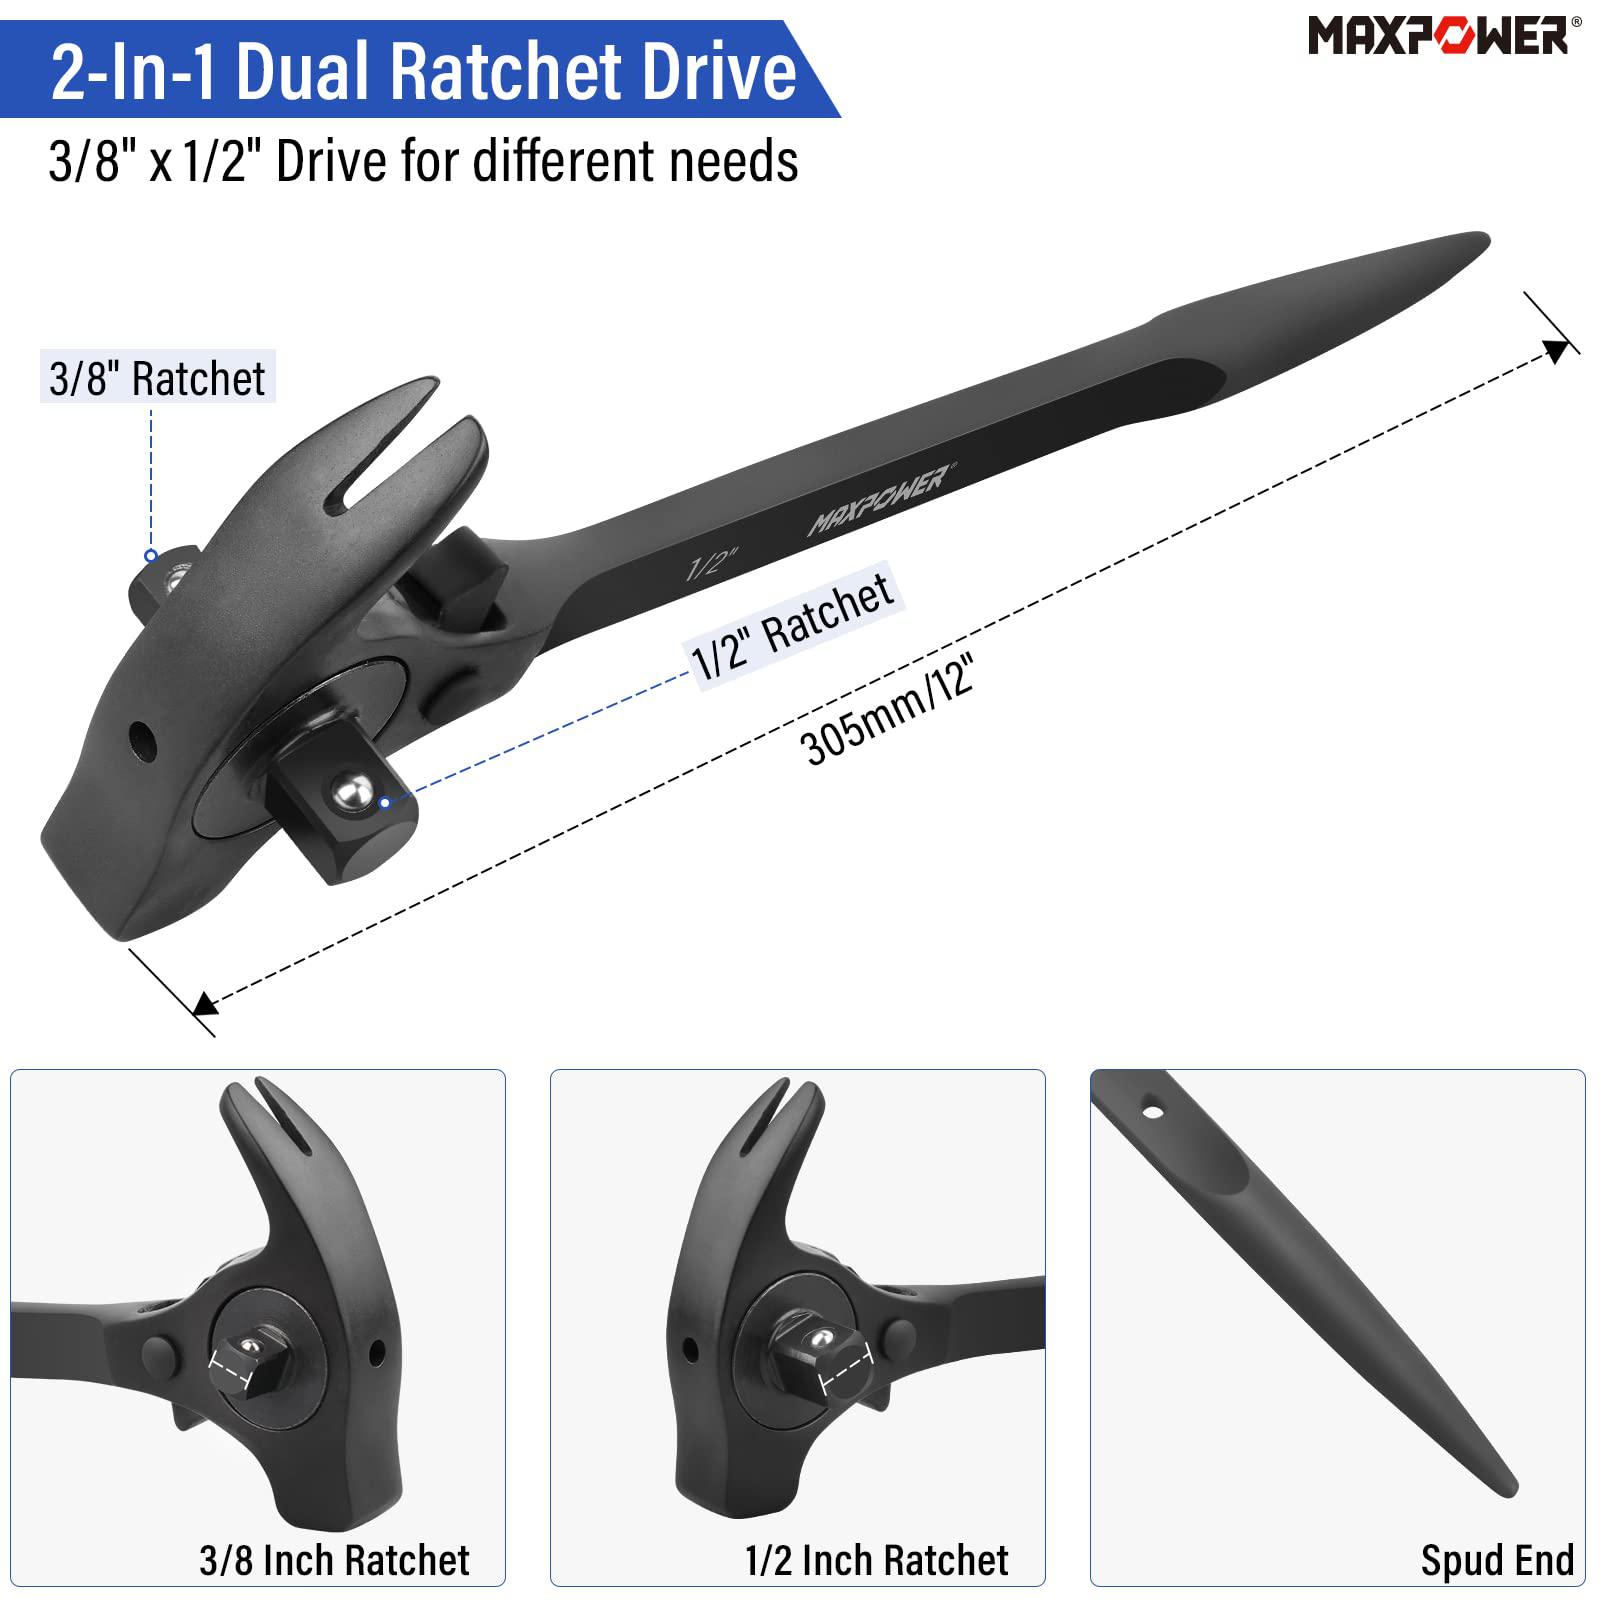 maxpower 1/2" and 3/8" drive scaffold ratchet wrench, podger spanner with claw hammer, crowbar, pry bar and nail puller funct